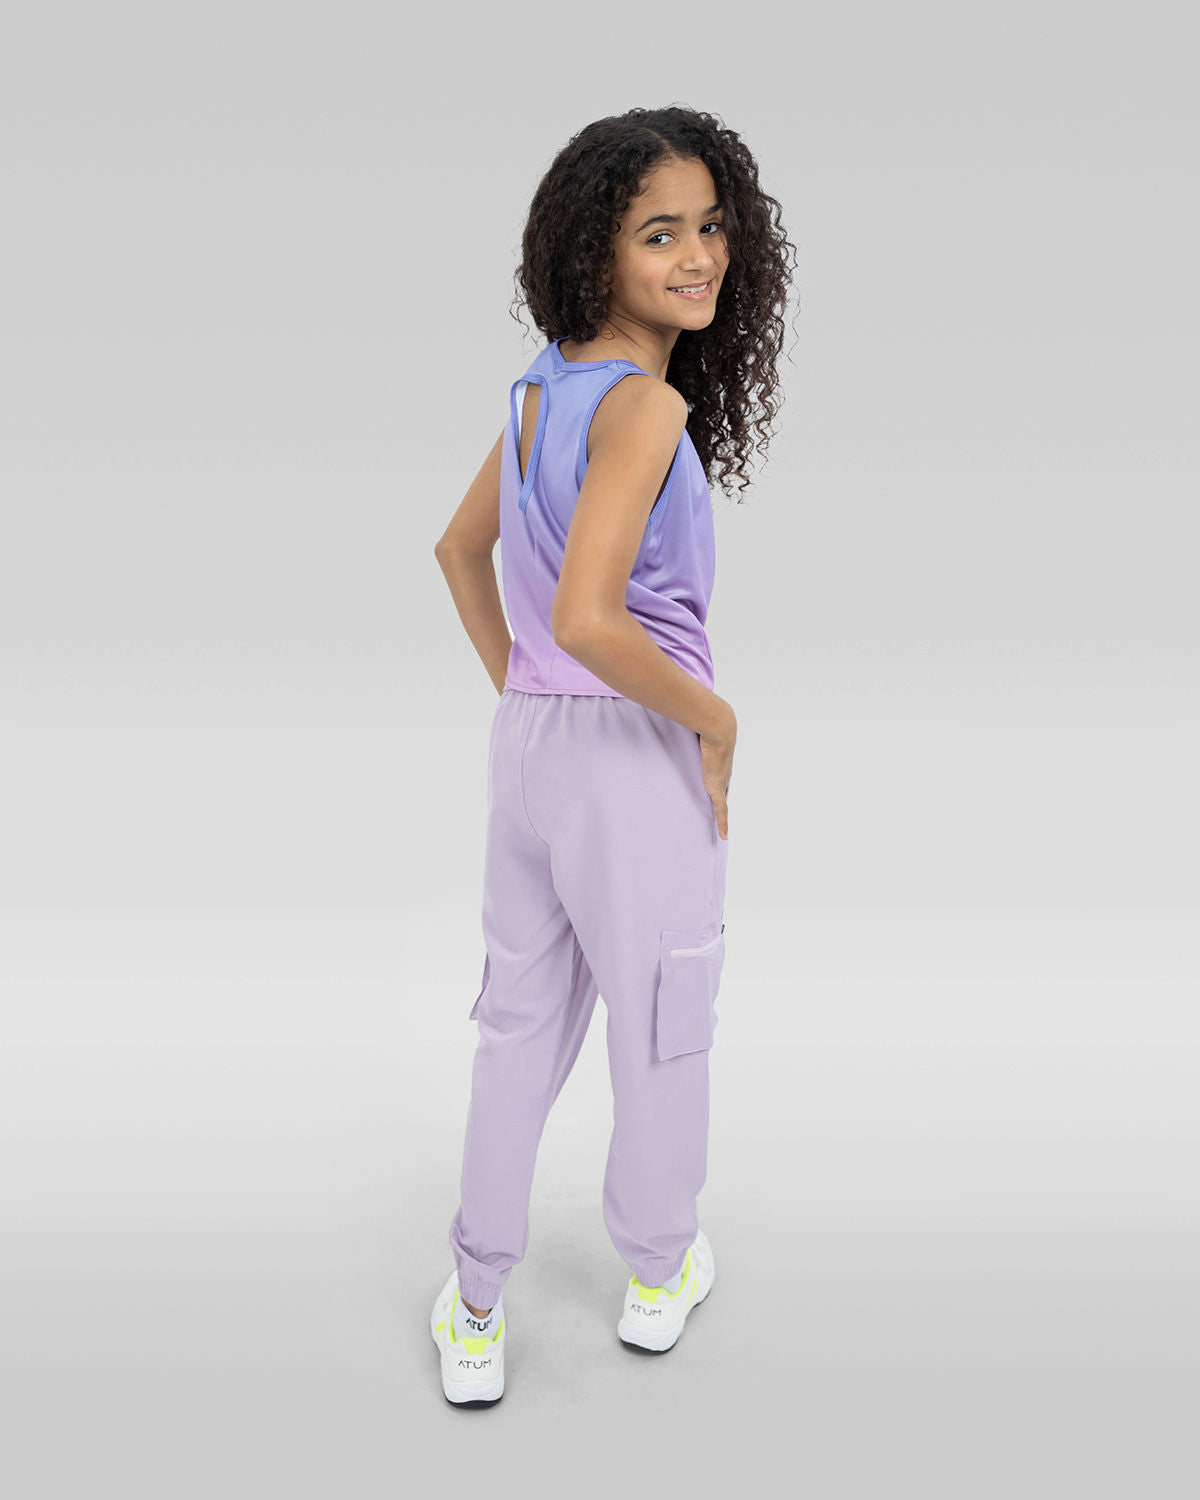 Simple and smooth girls pants - Atum Egypt #